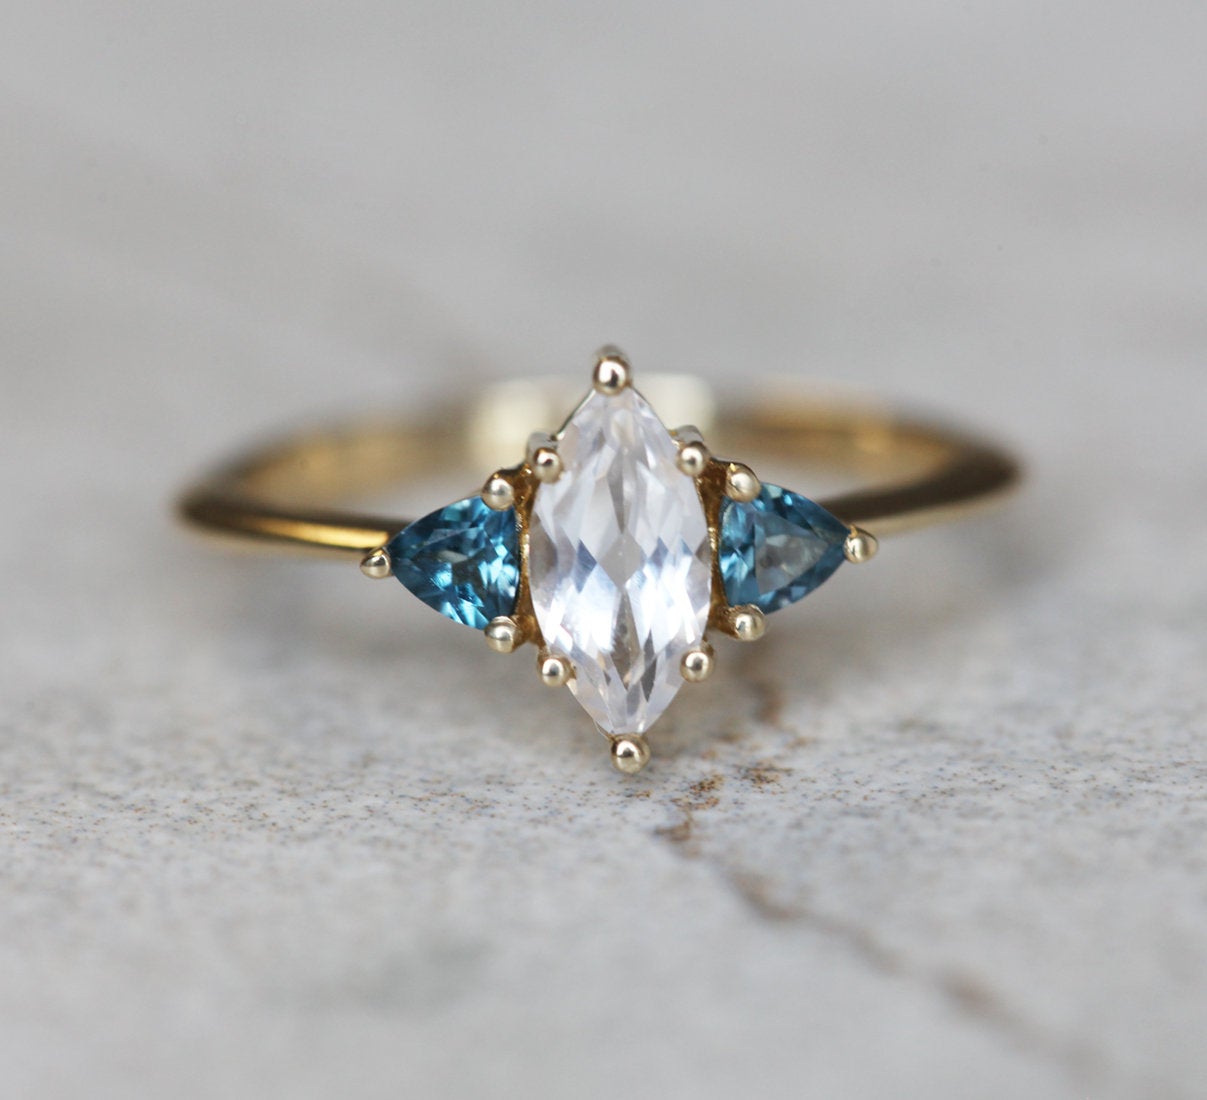 Marquise-cut white sapphire ring with topaz gemstones